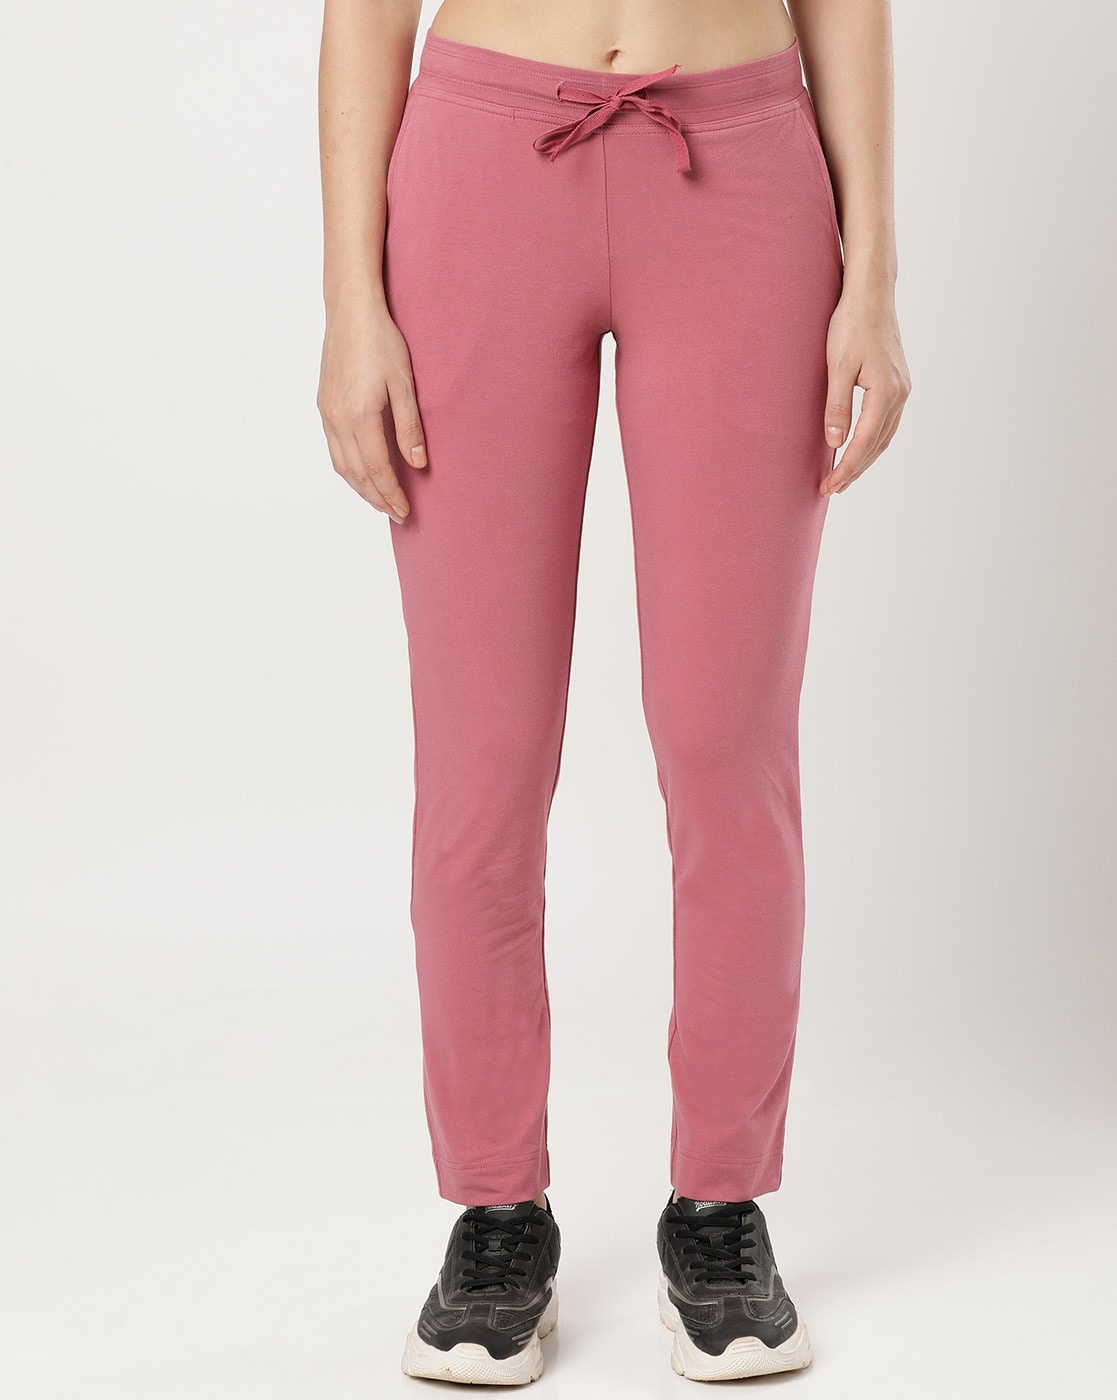 Beverly Hills Polo Club Womens Track Pant in Pune - Dealers, Manufacturers  & Suppliers - Justdial